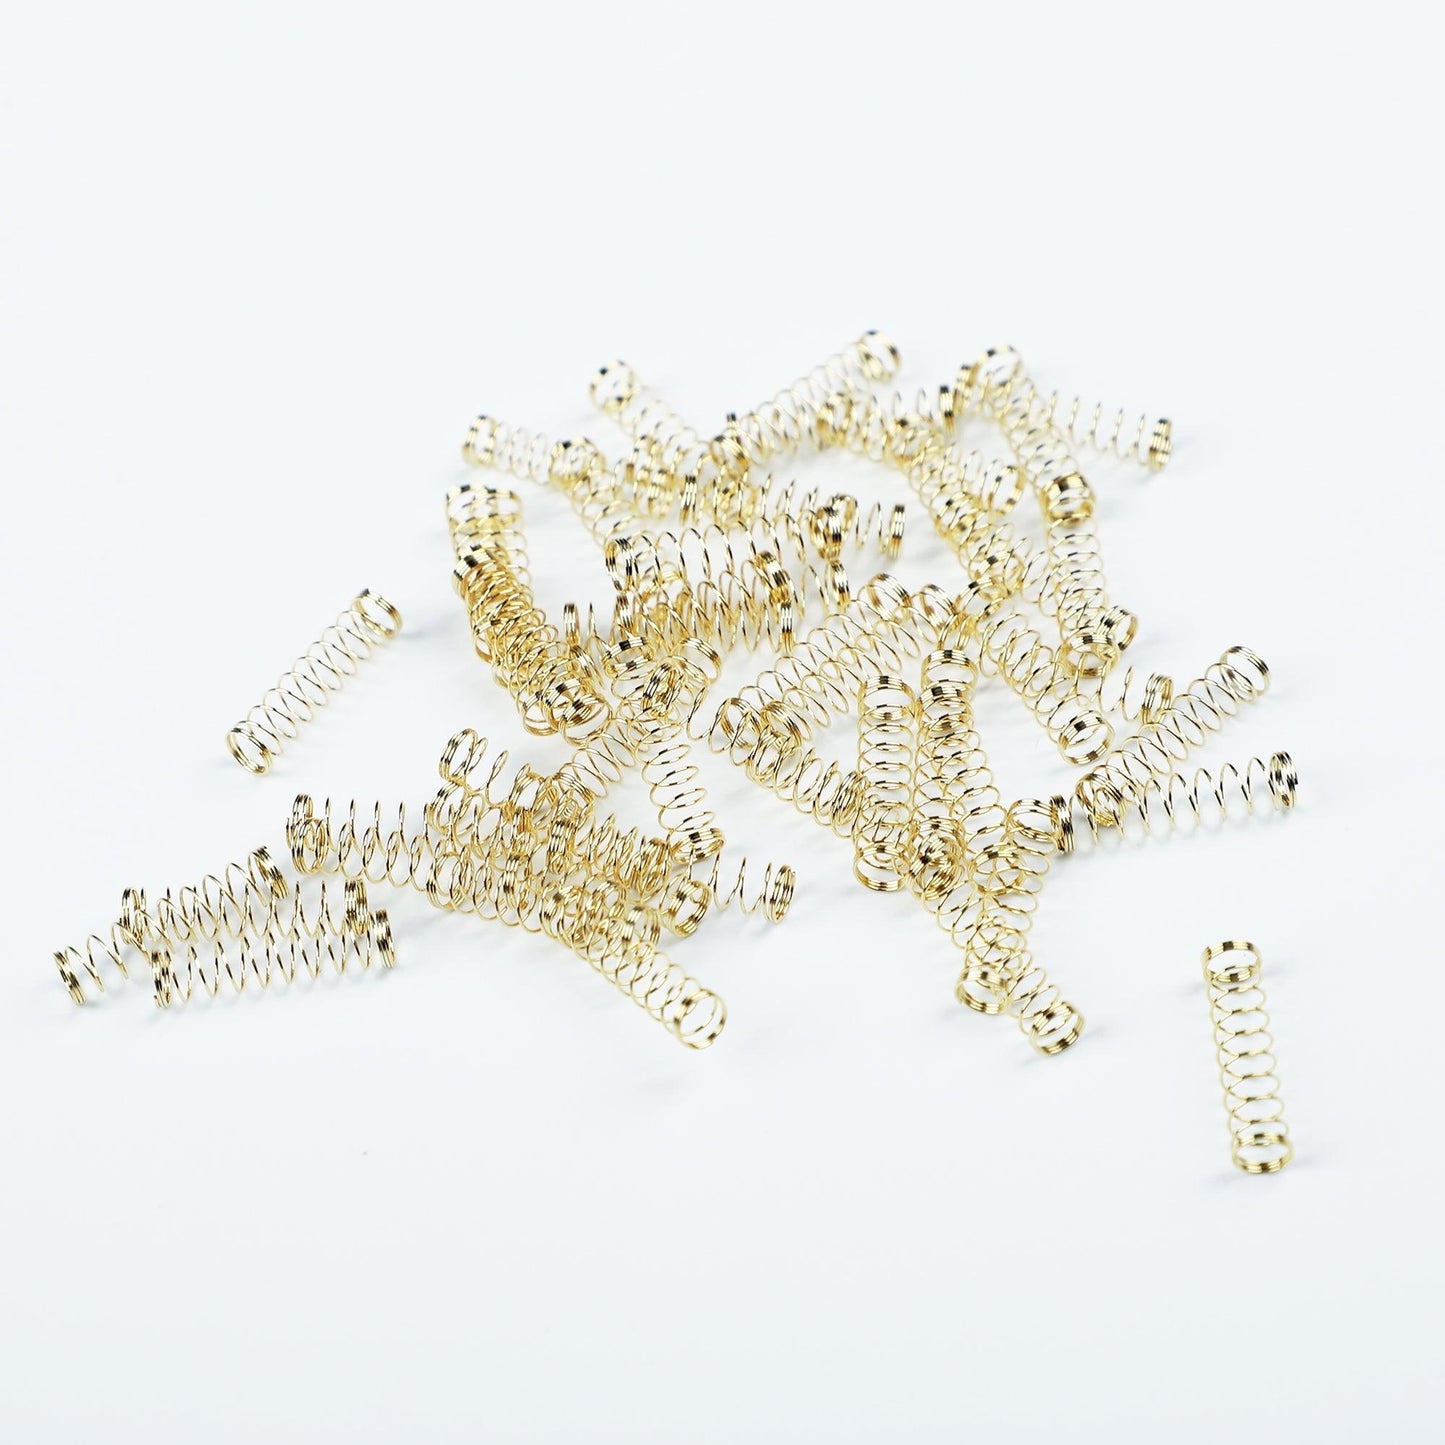 110pcs\lot 24k Gold-plated And Stainless Steel Custom Springs For switches Replacement - IPOPULARSHOP